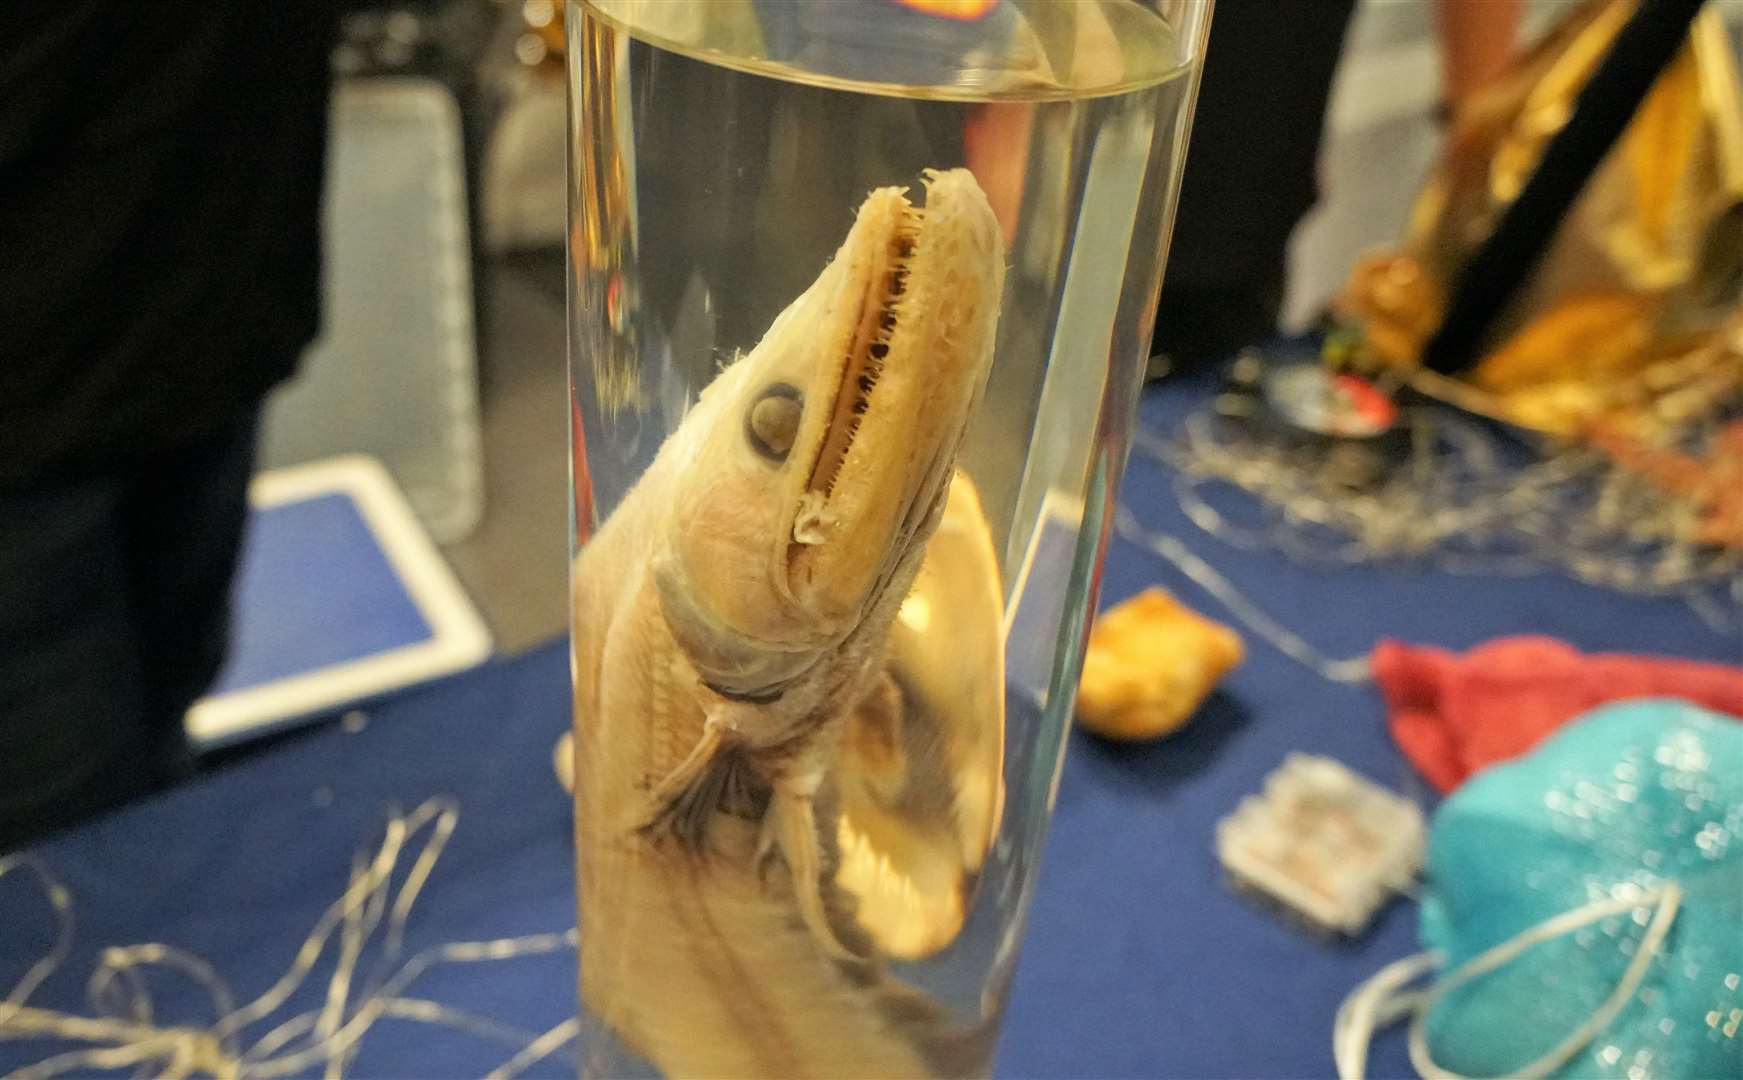 One of the exhibits from the Dynamic Earth team was this predatory fish called Bathysaurus ferox or Deepsea Lizardfish. It lives at over 3000ft under the sea and can go for months at a time without eating by going into a state of hibernation. Picture: DGS